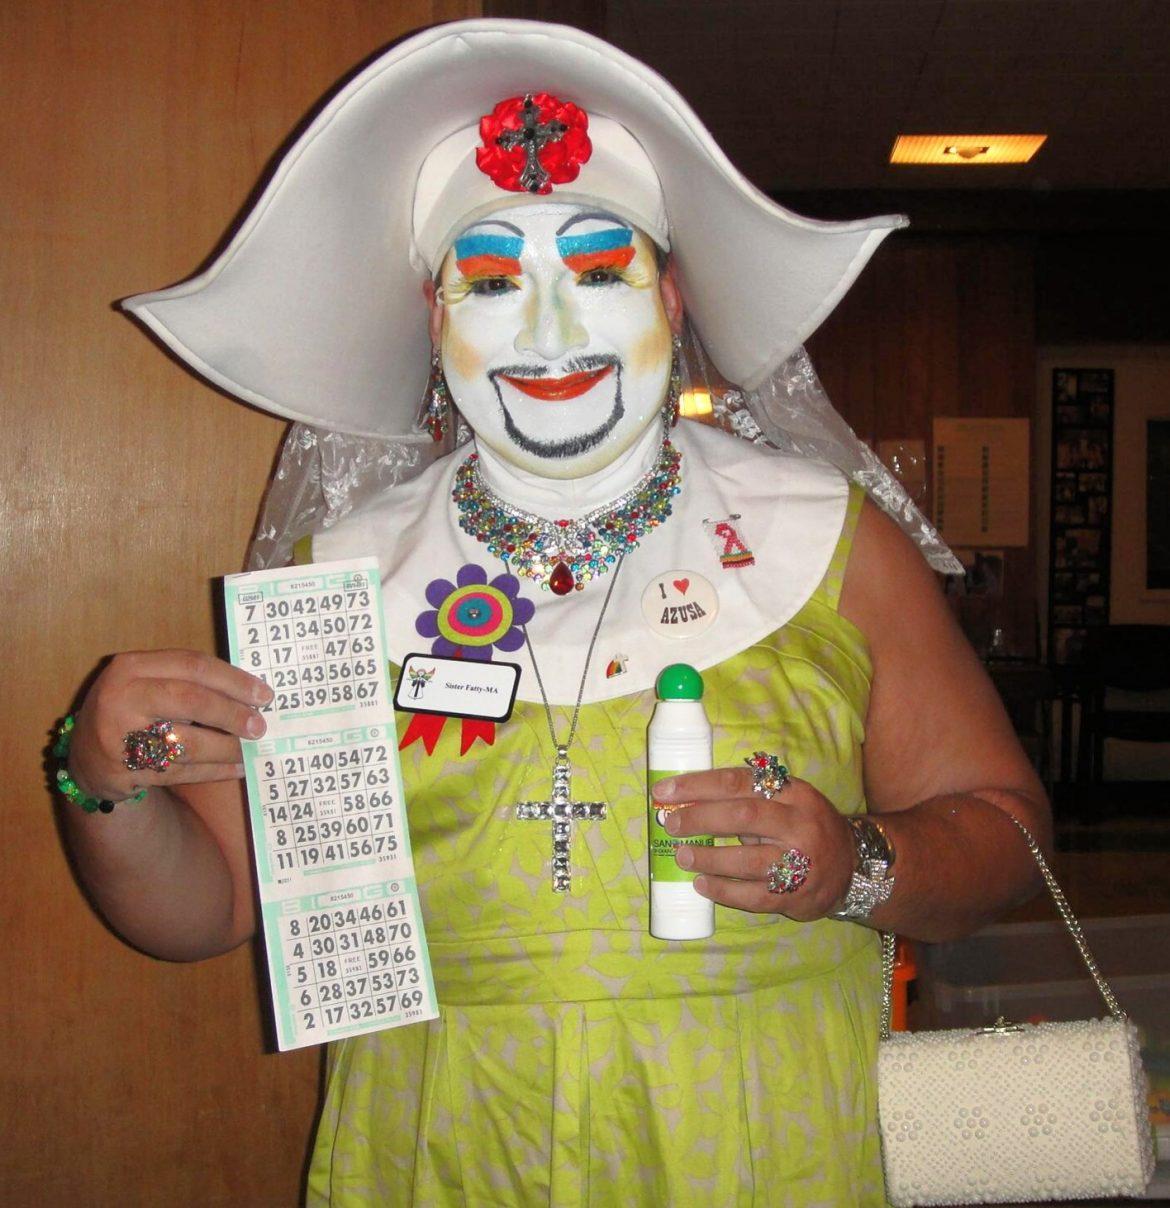 Sister+Fatty-Ma%2C+of+the+Sisters+of+Perpetual+Indulgence%2C+at+a+charity+bingo+event+at+the+Westminster+Presbyterian+Church+in+Pasadena.+